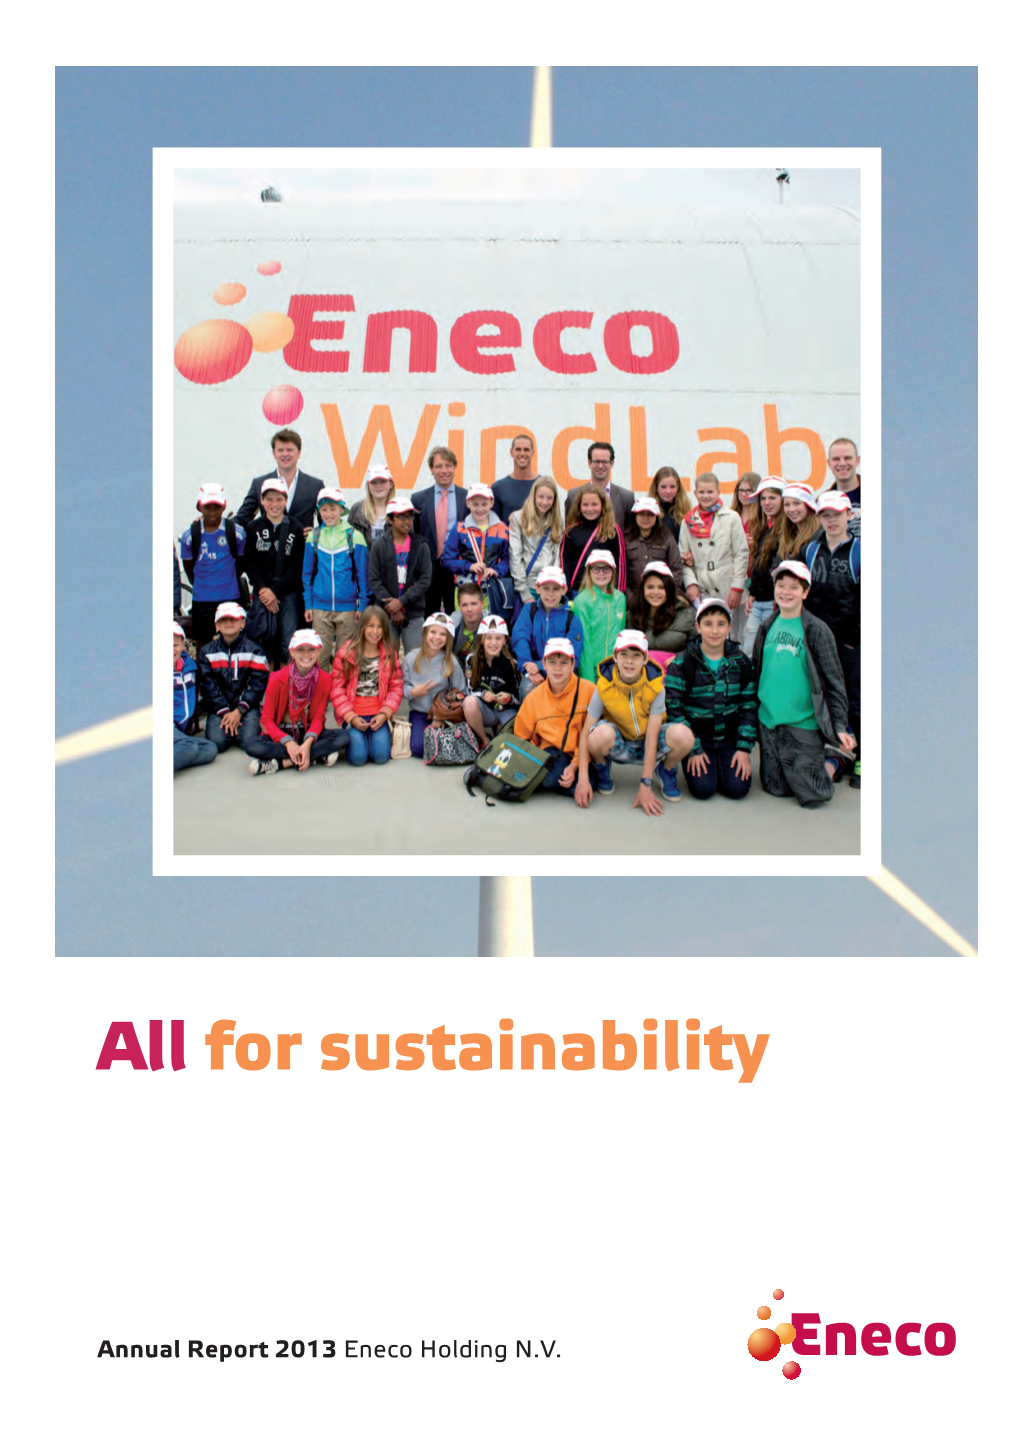 Annual Report 2013 Eneco Holding N.V